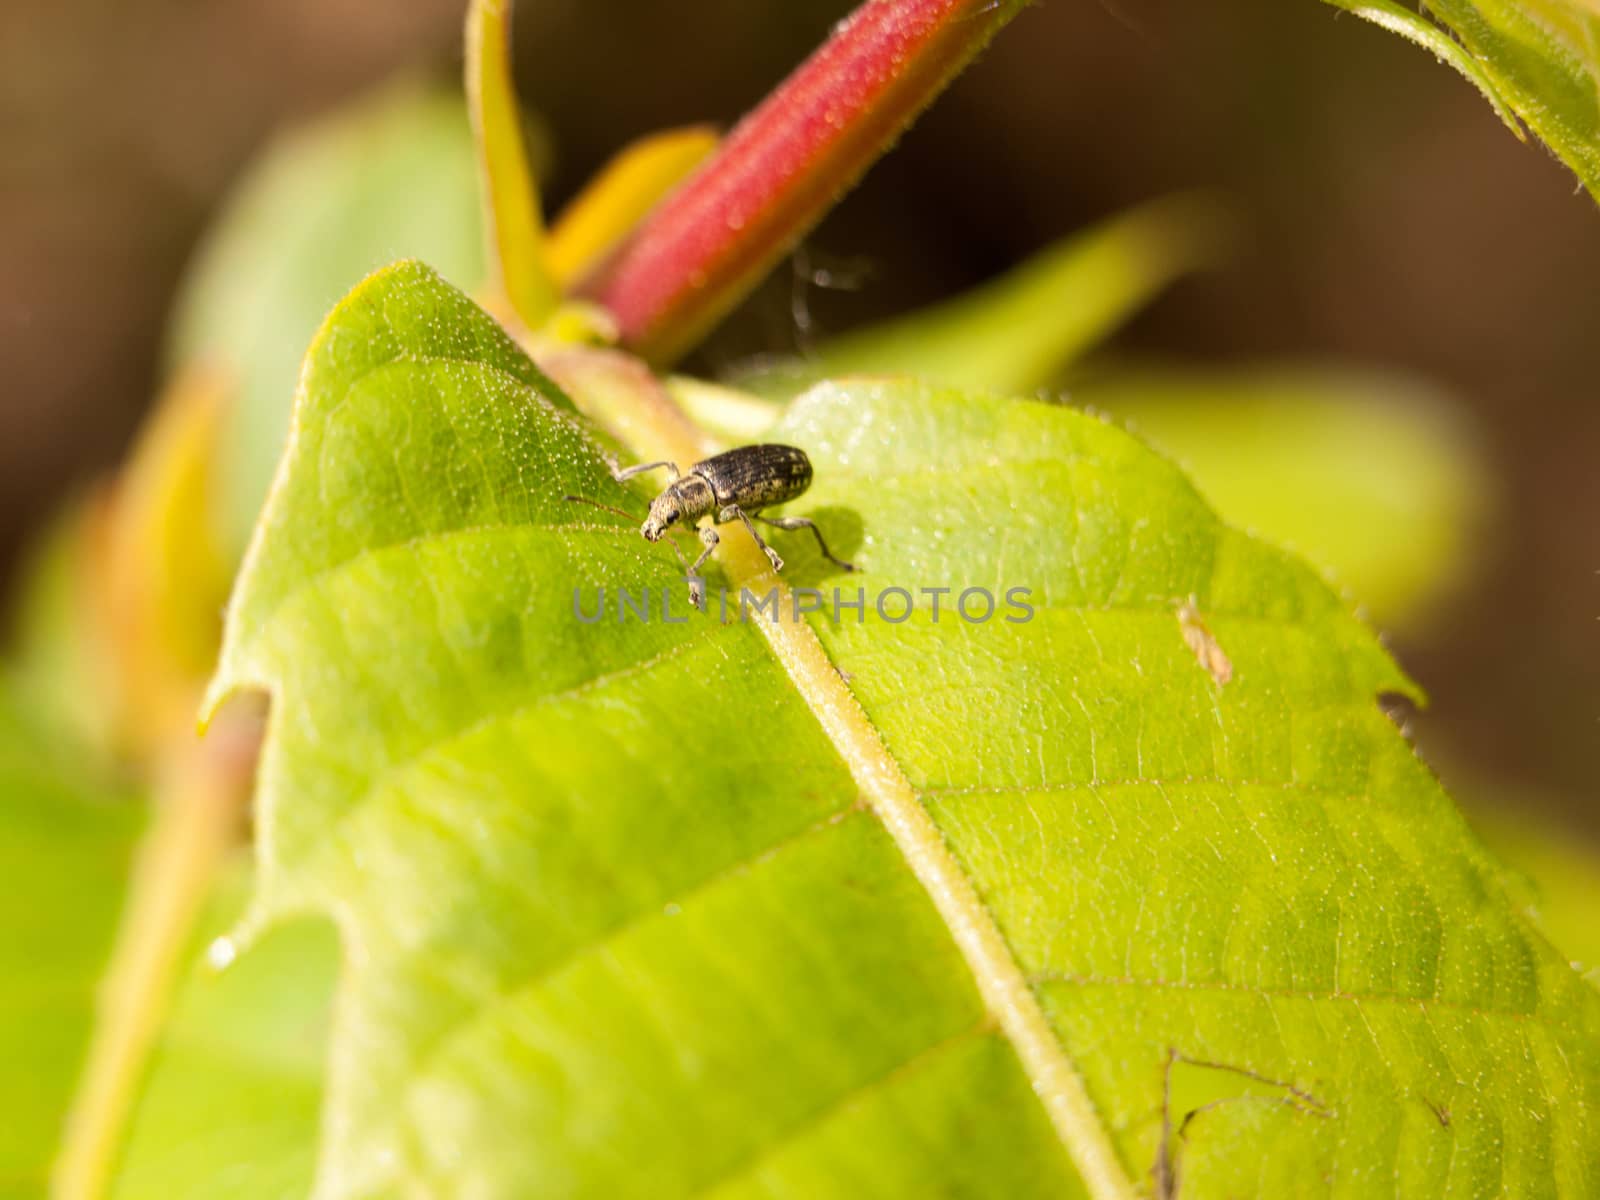 an interesting bug walking along a bright green leaf looking cool and productive searching for food and prey